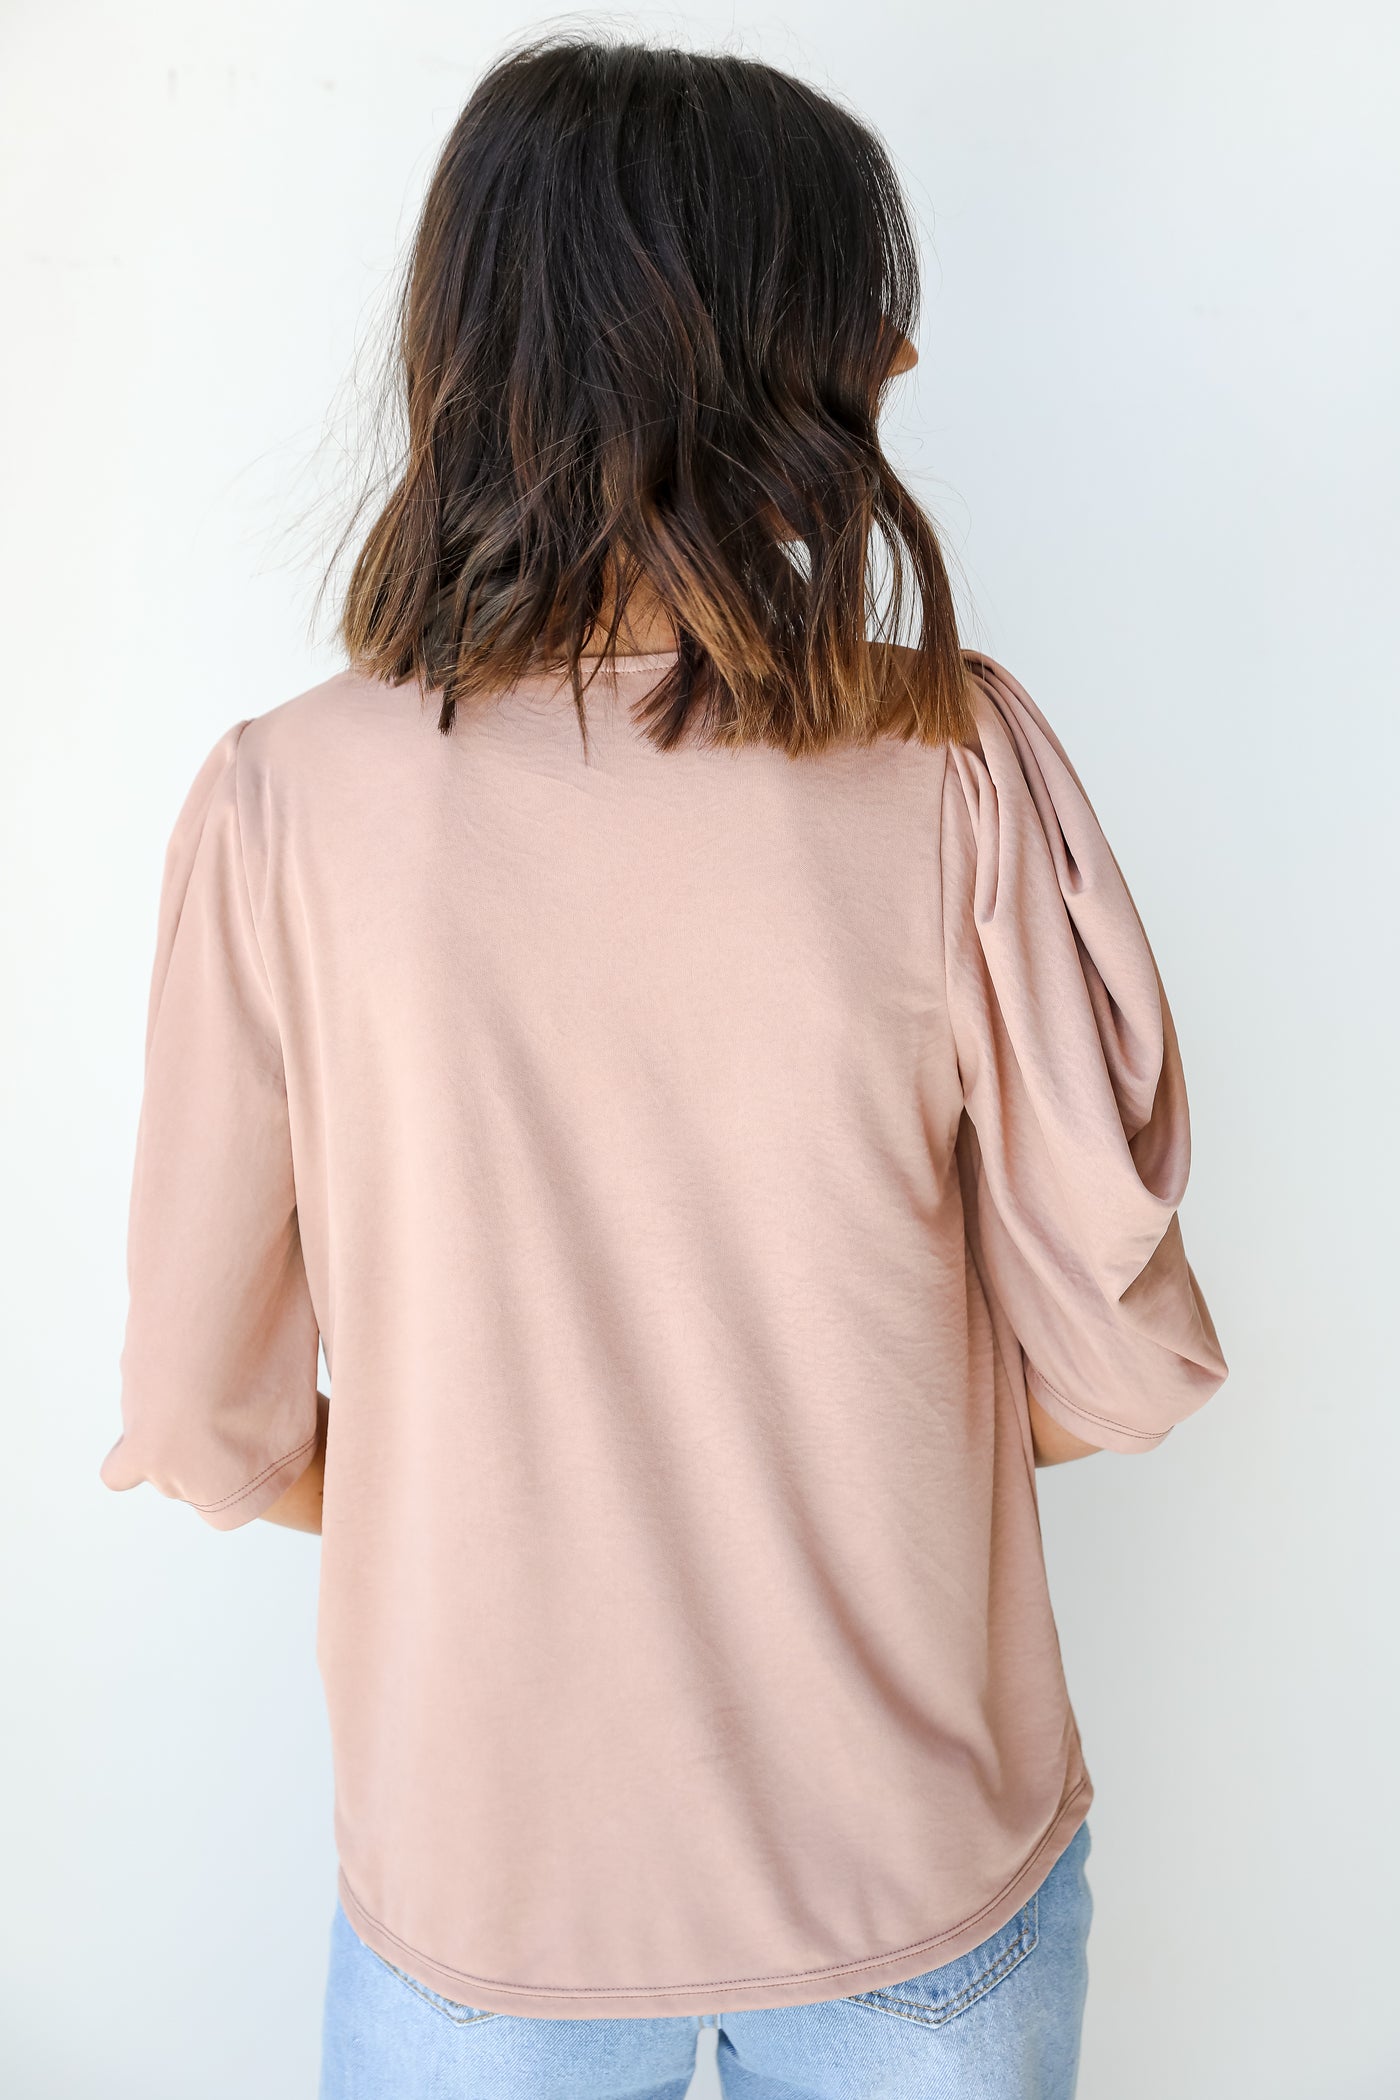 Puff Sleeve Top in blush back view